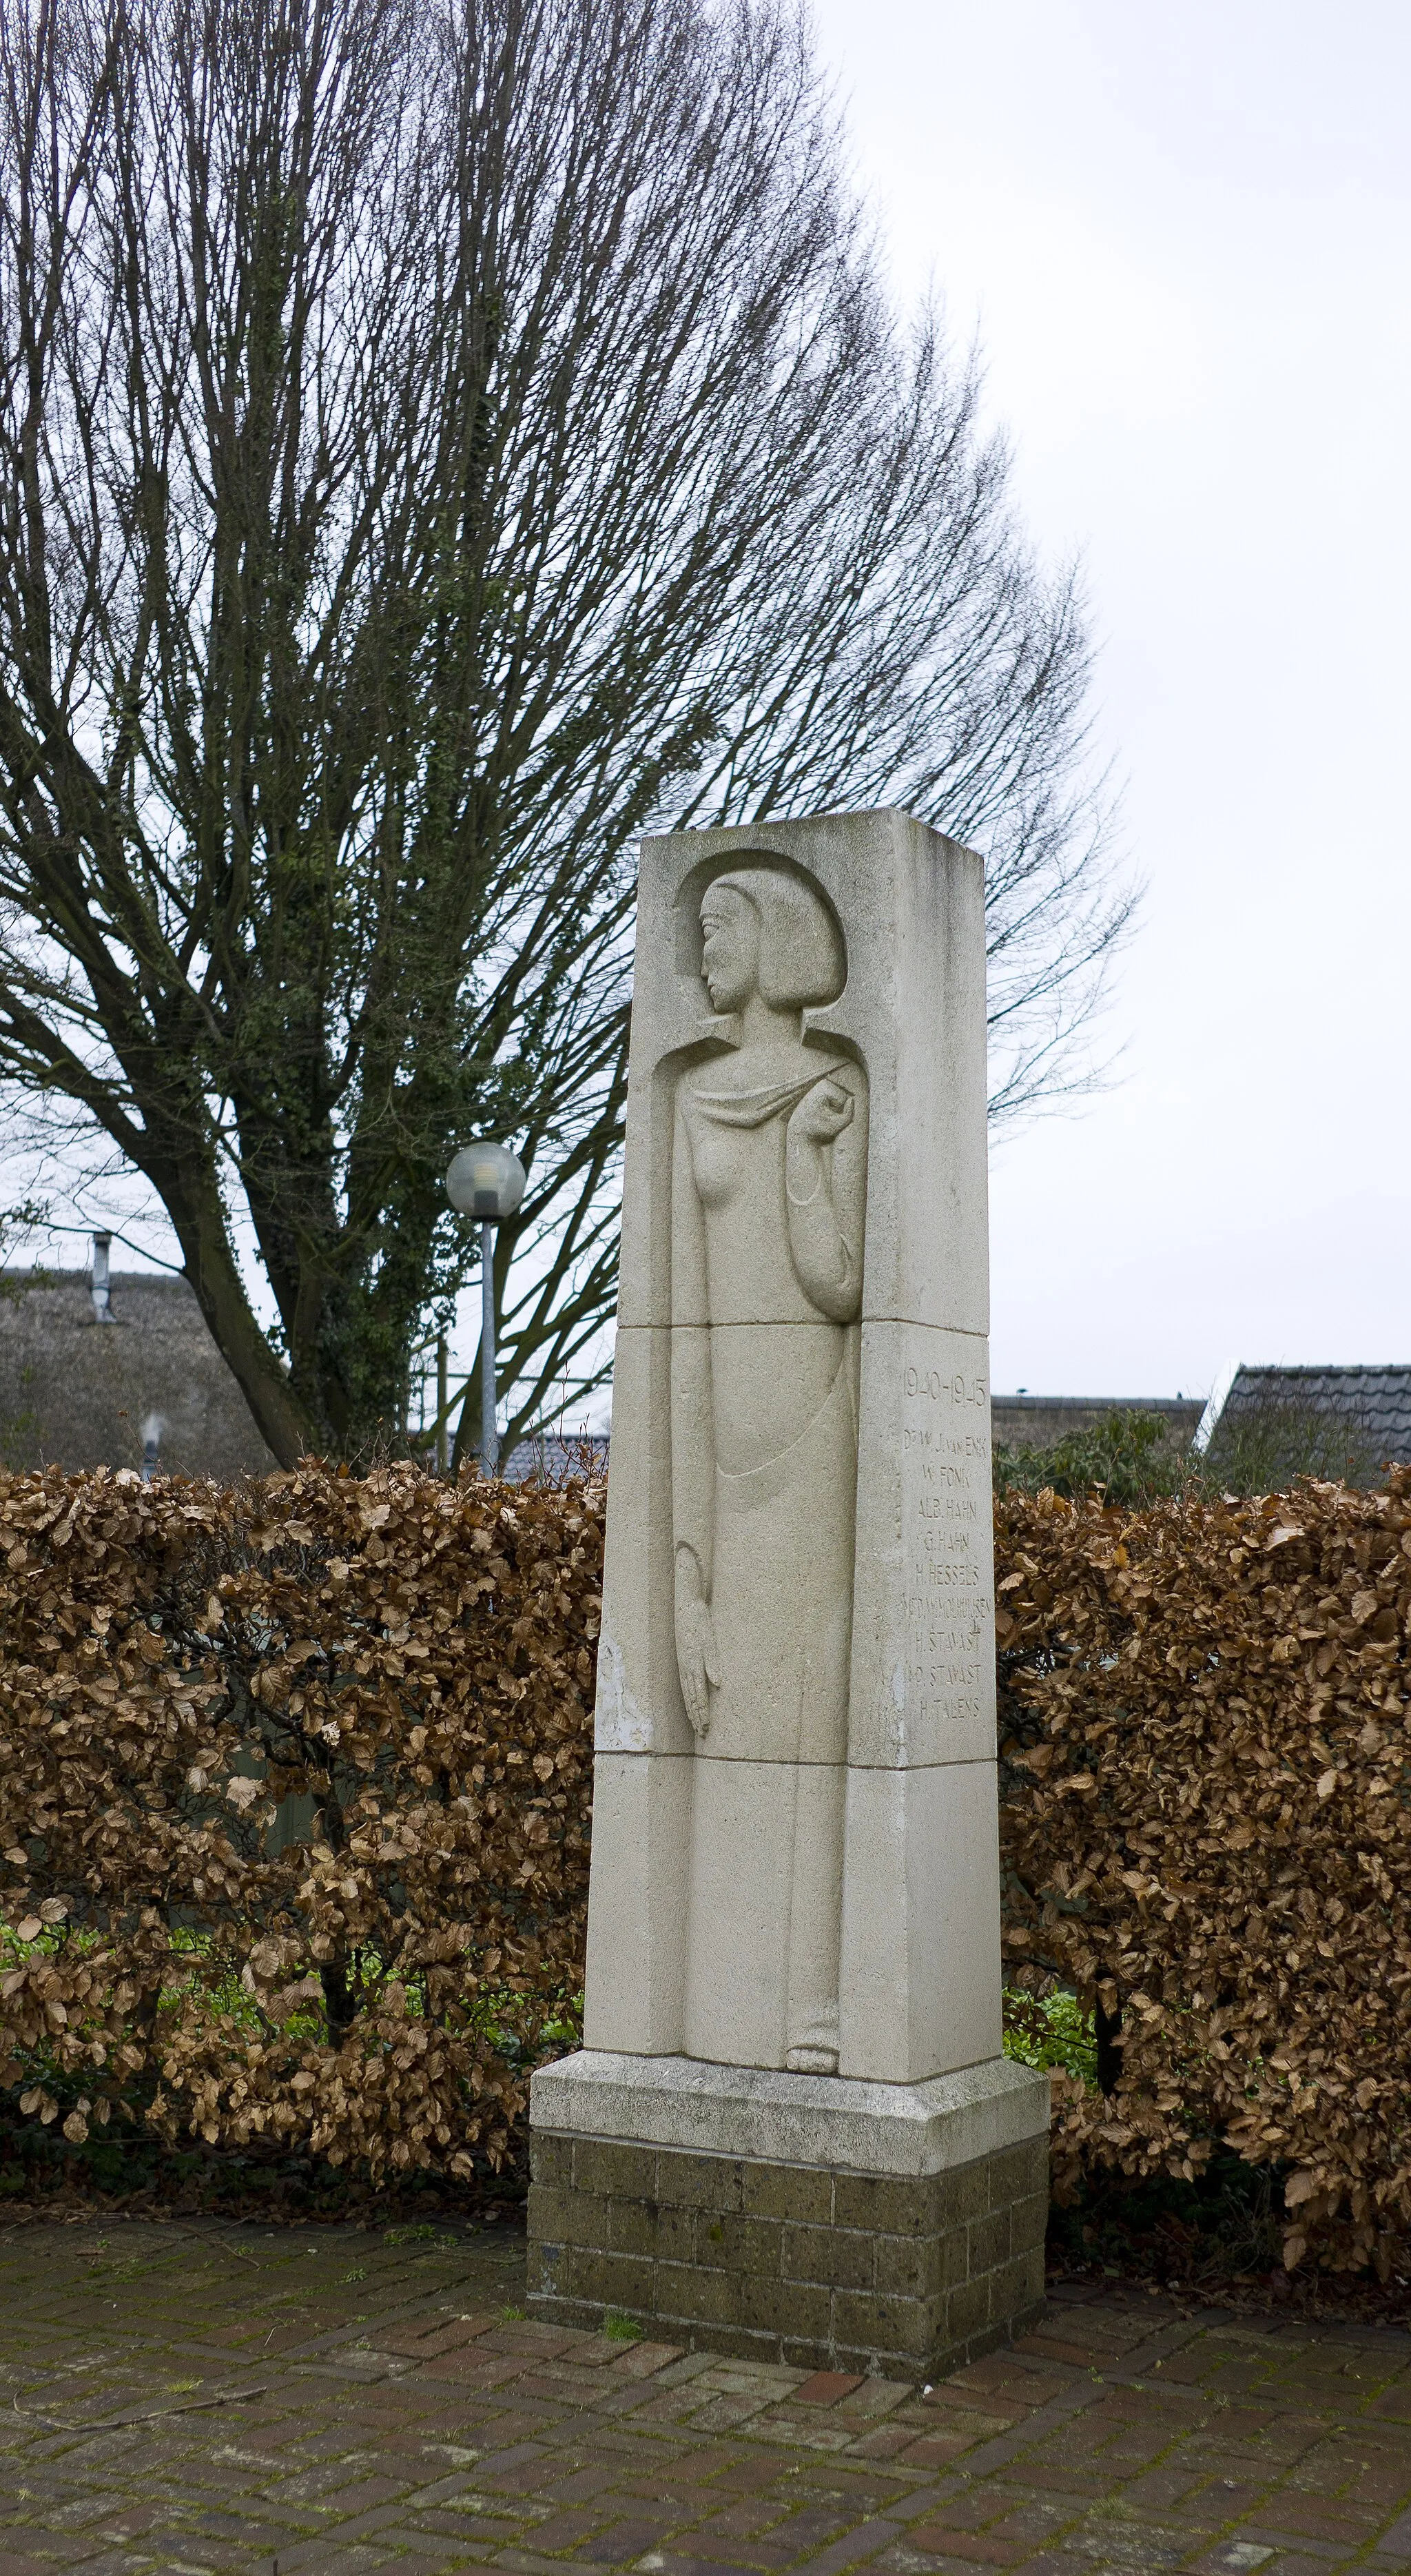 Photo showing: This is an image of a war memorial in the Netherlands, number: